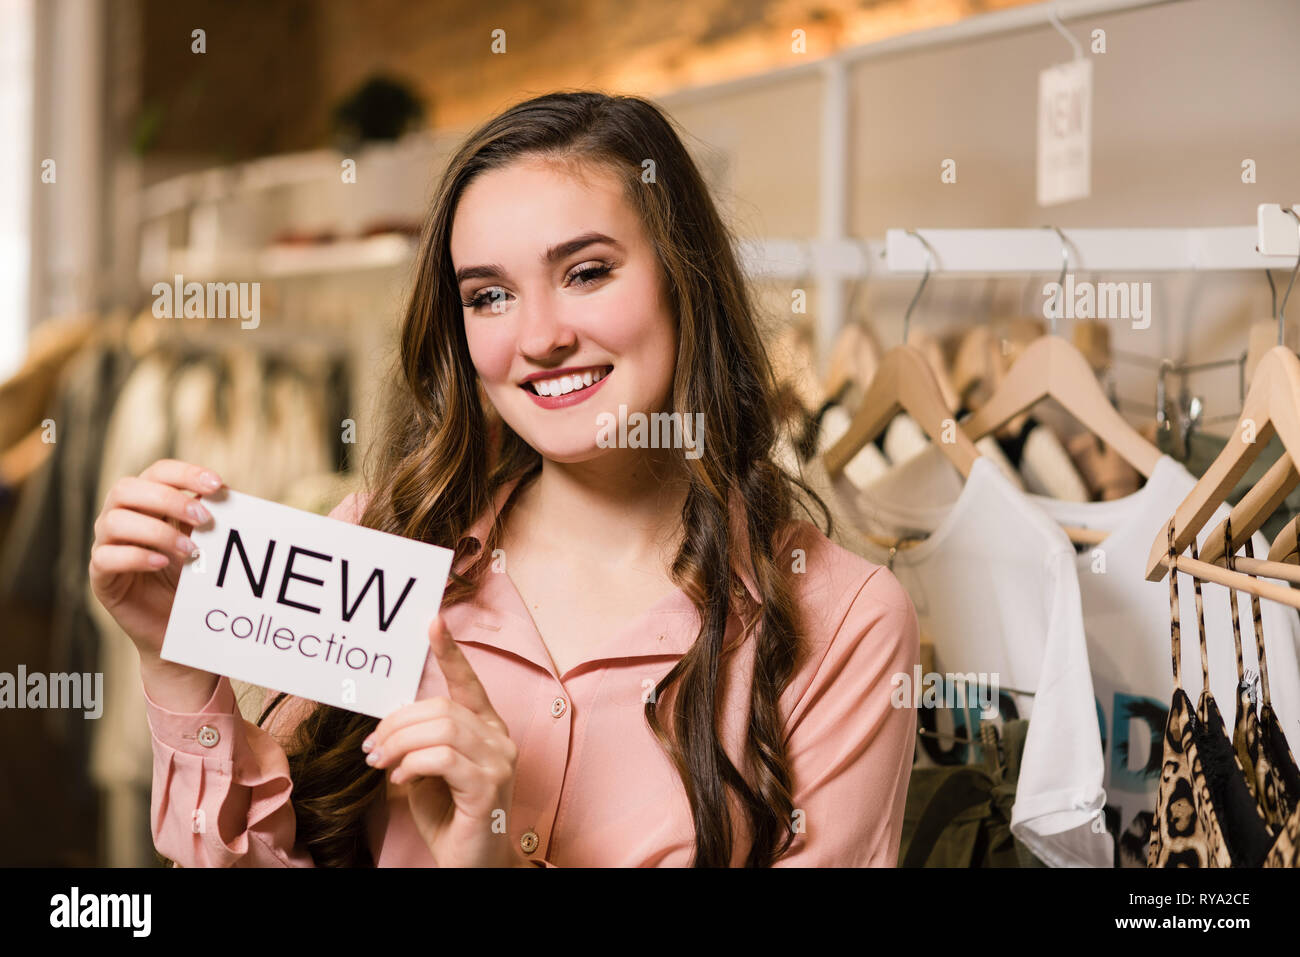 Smiling brunette woman with new collection words. Stock Photo